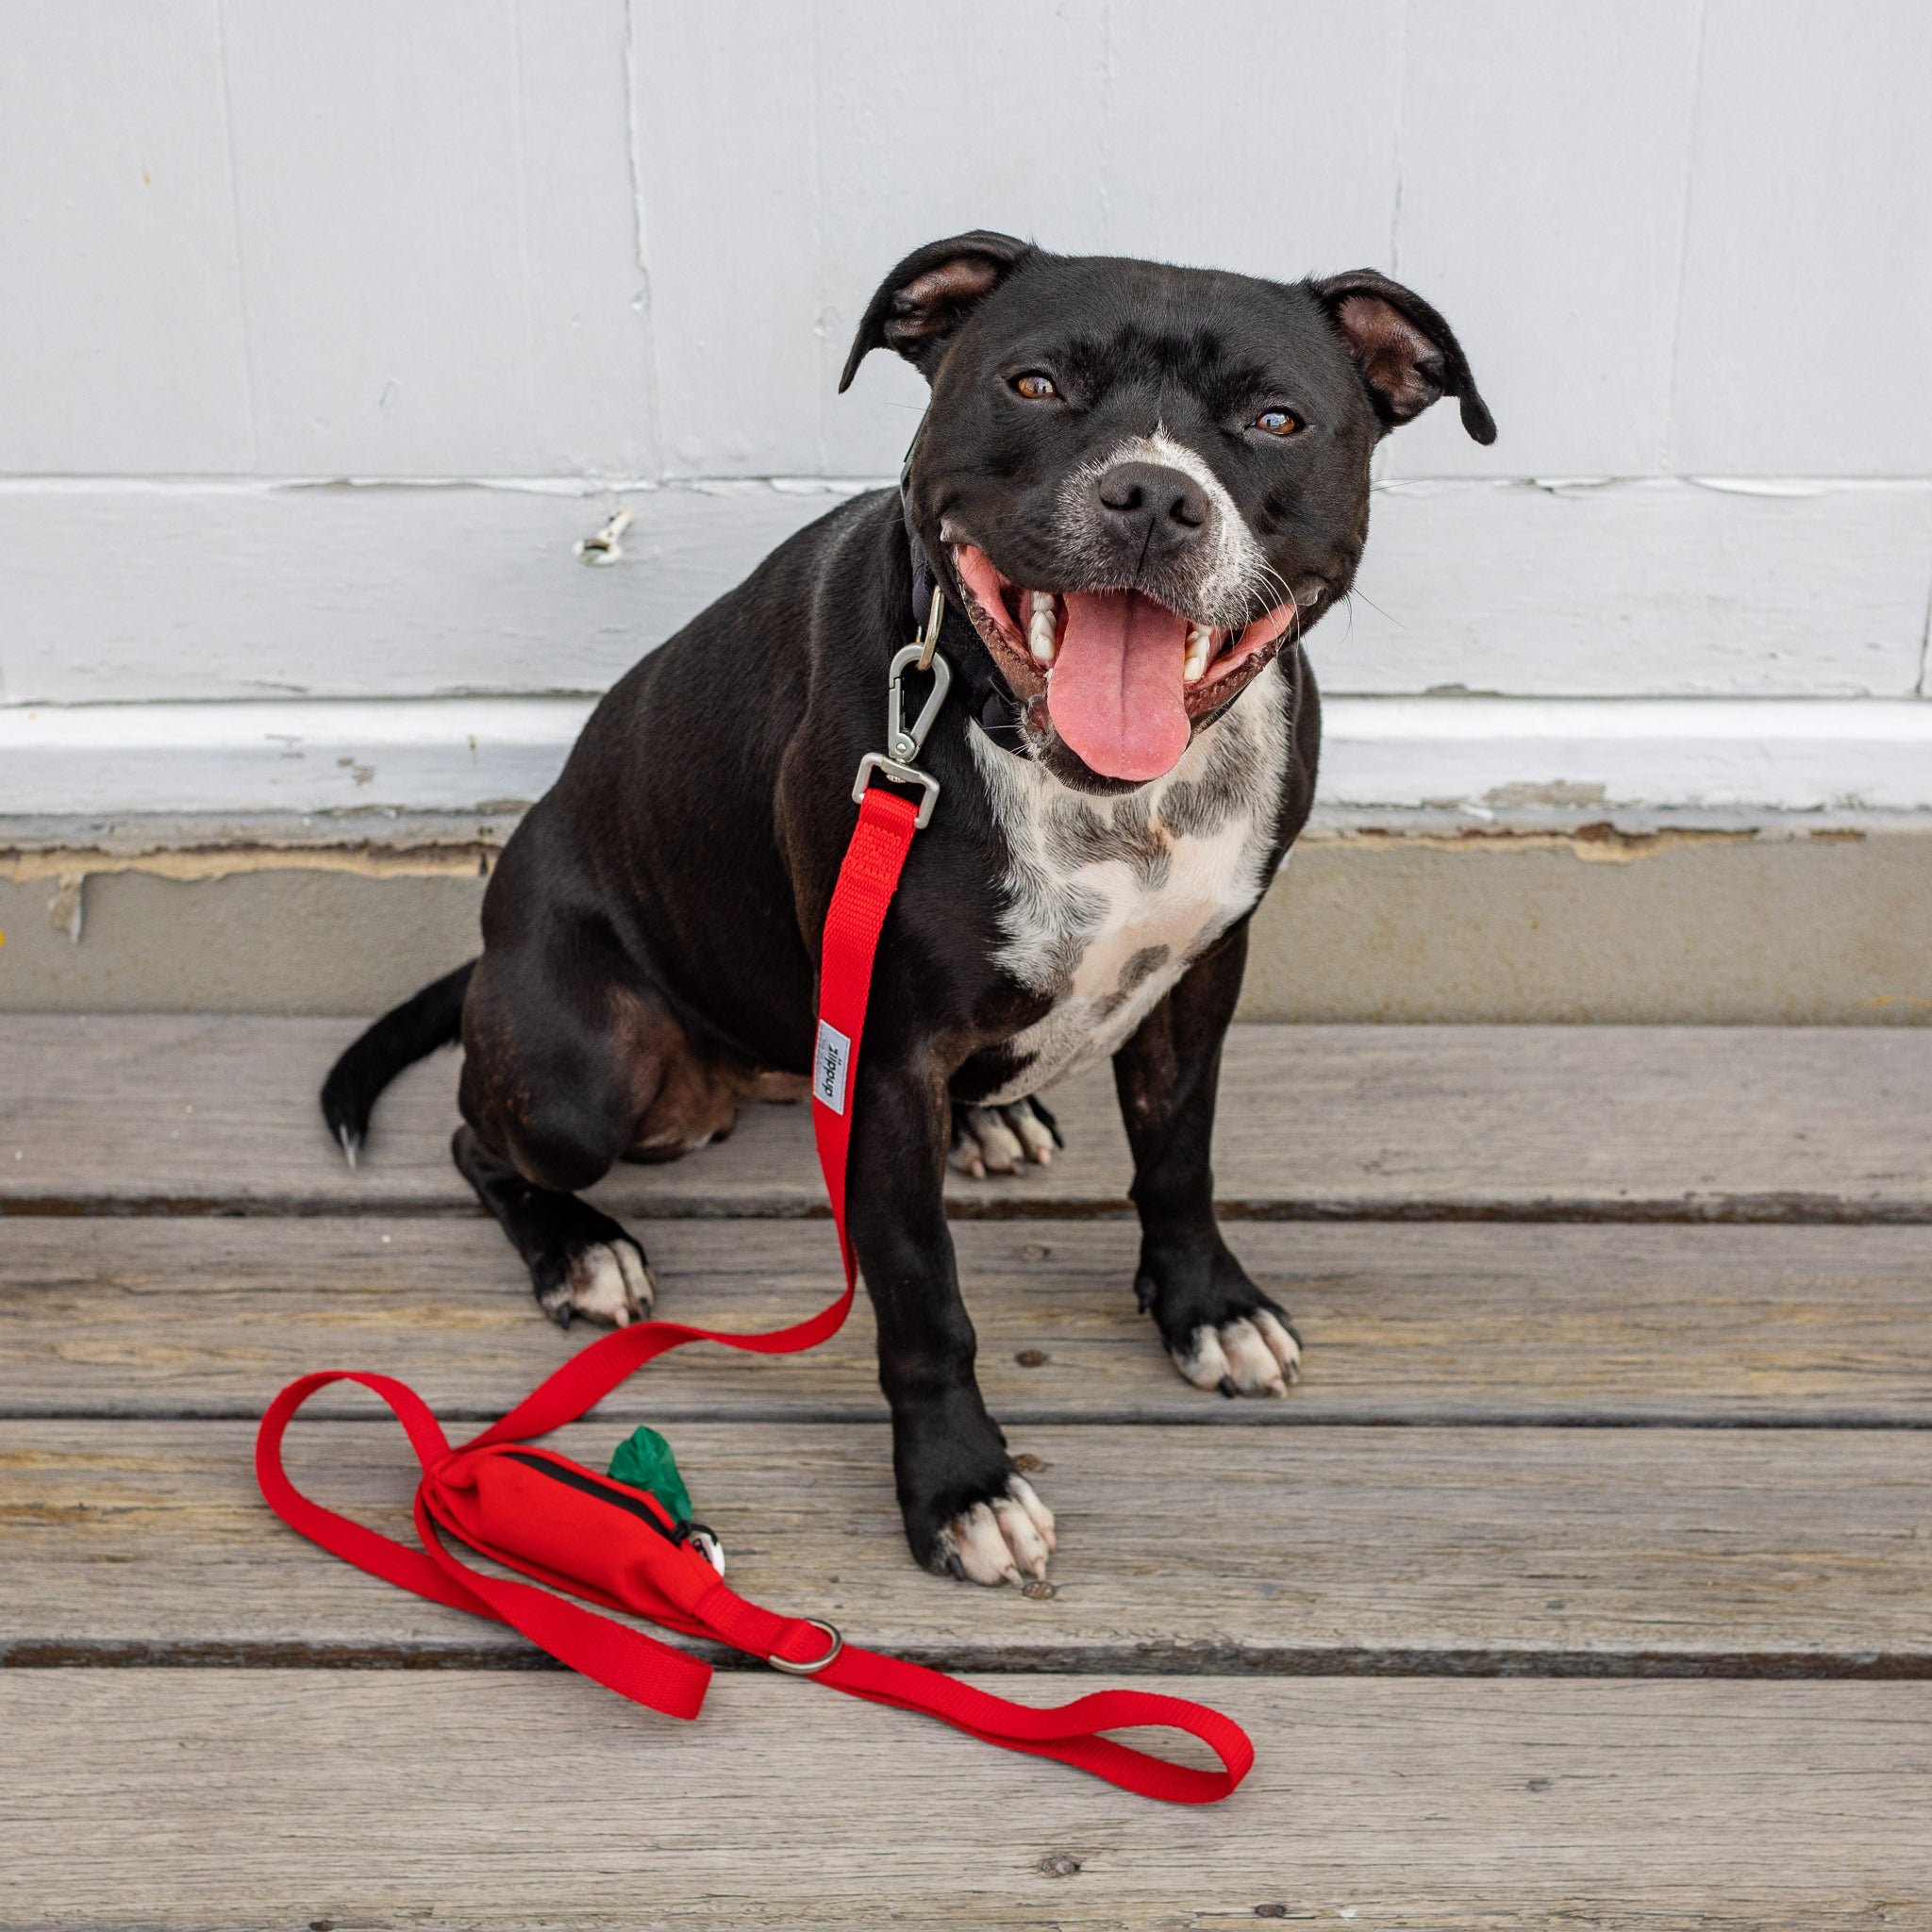 Black and white Staffy wearing red dog lead